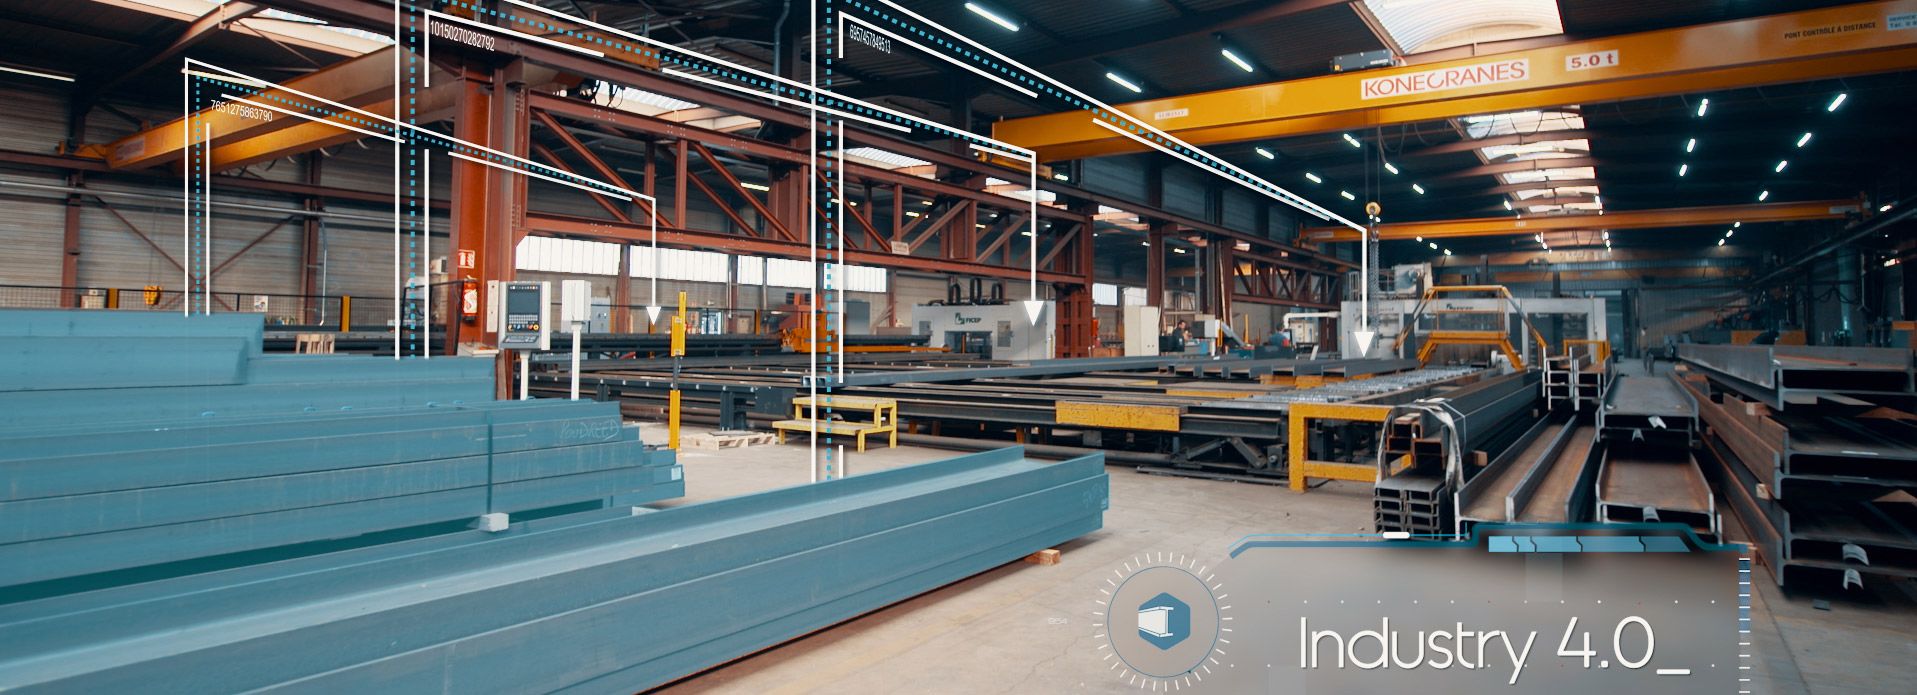 steel fabrication production industry 4.0